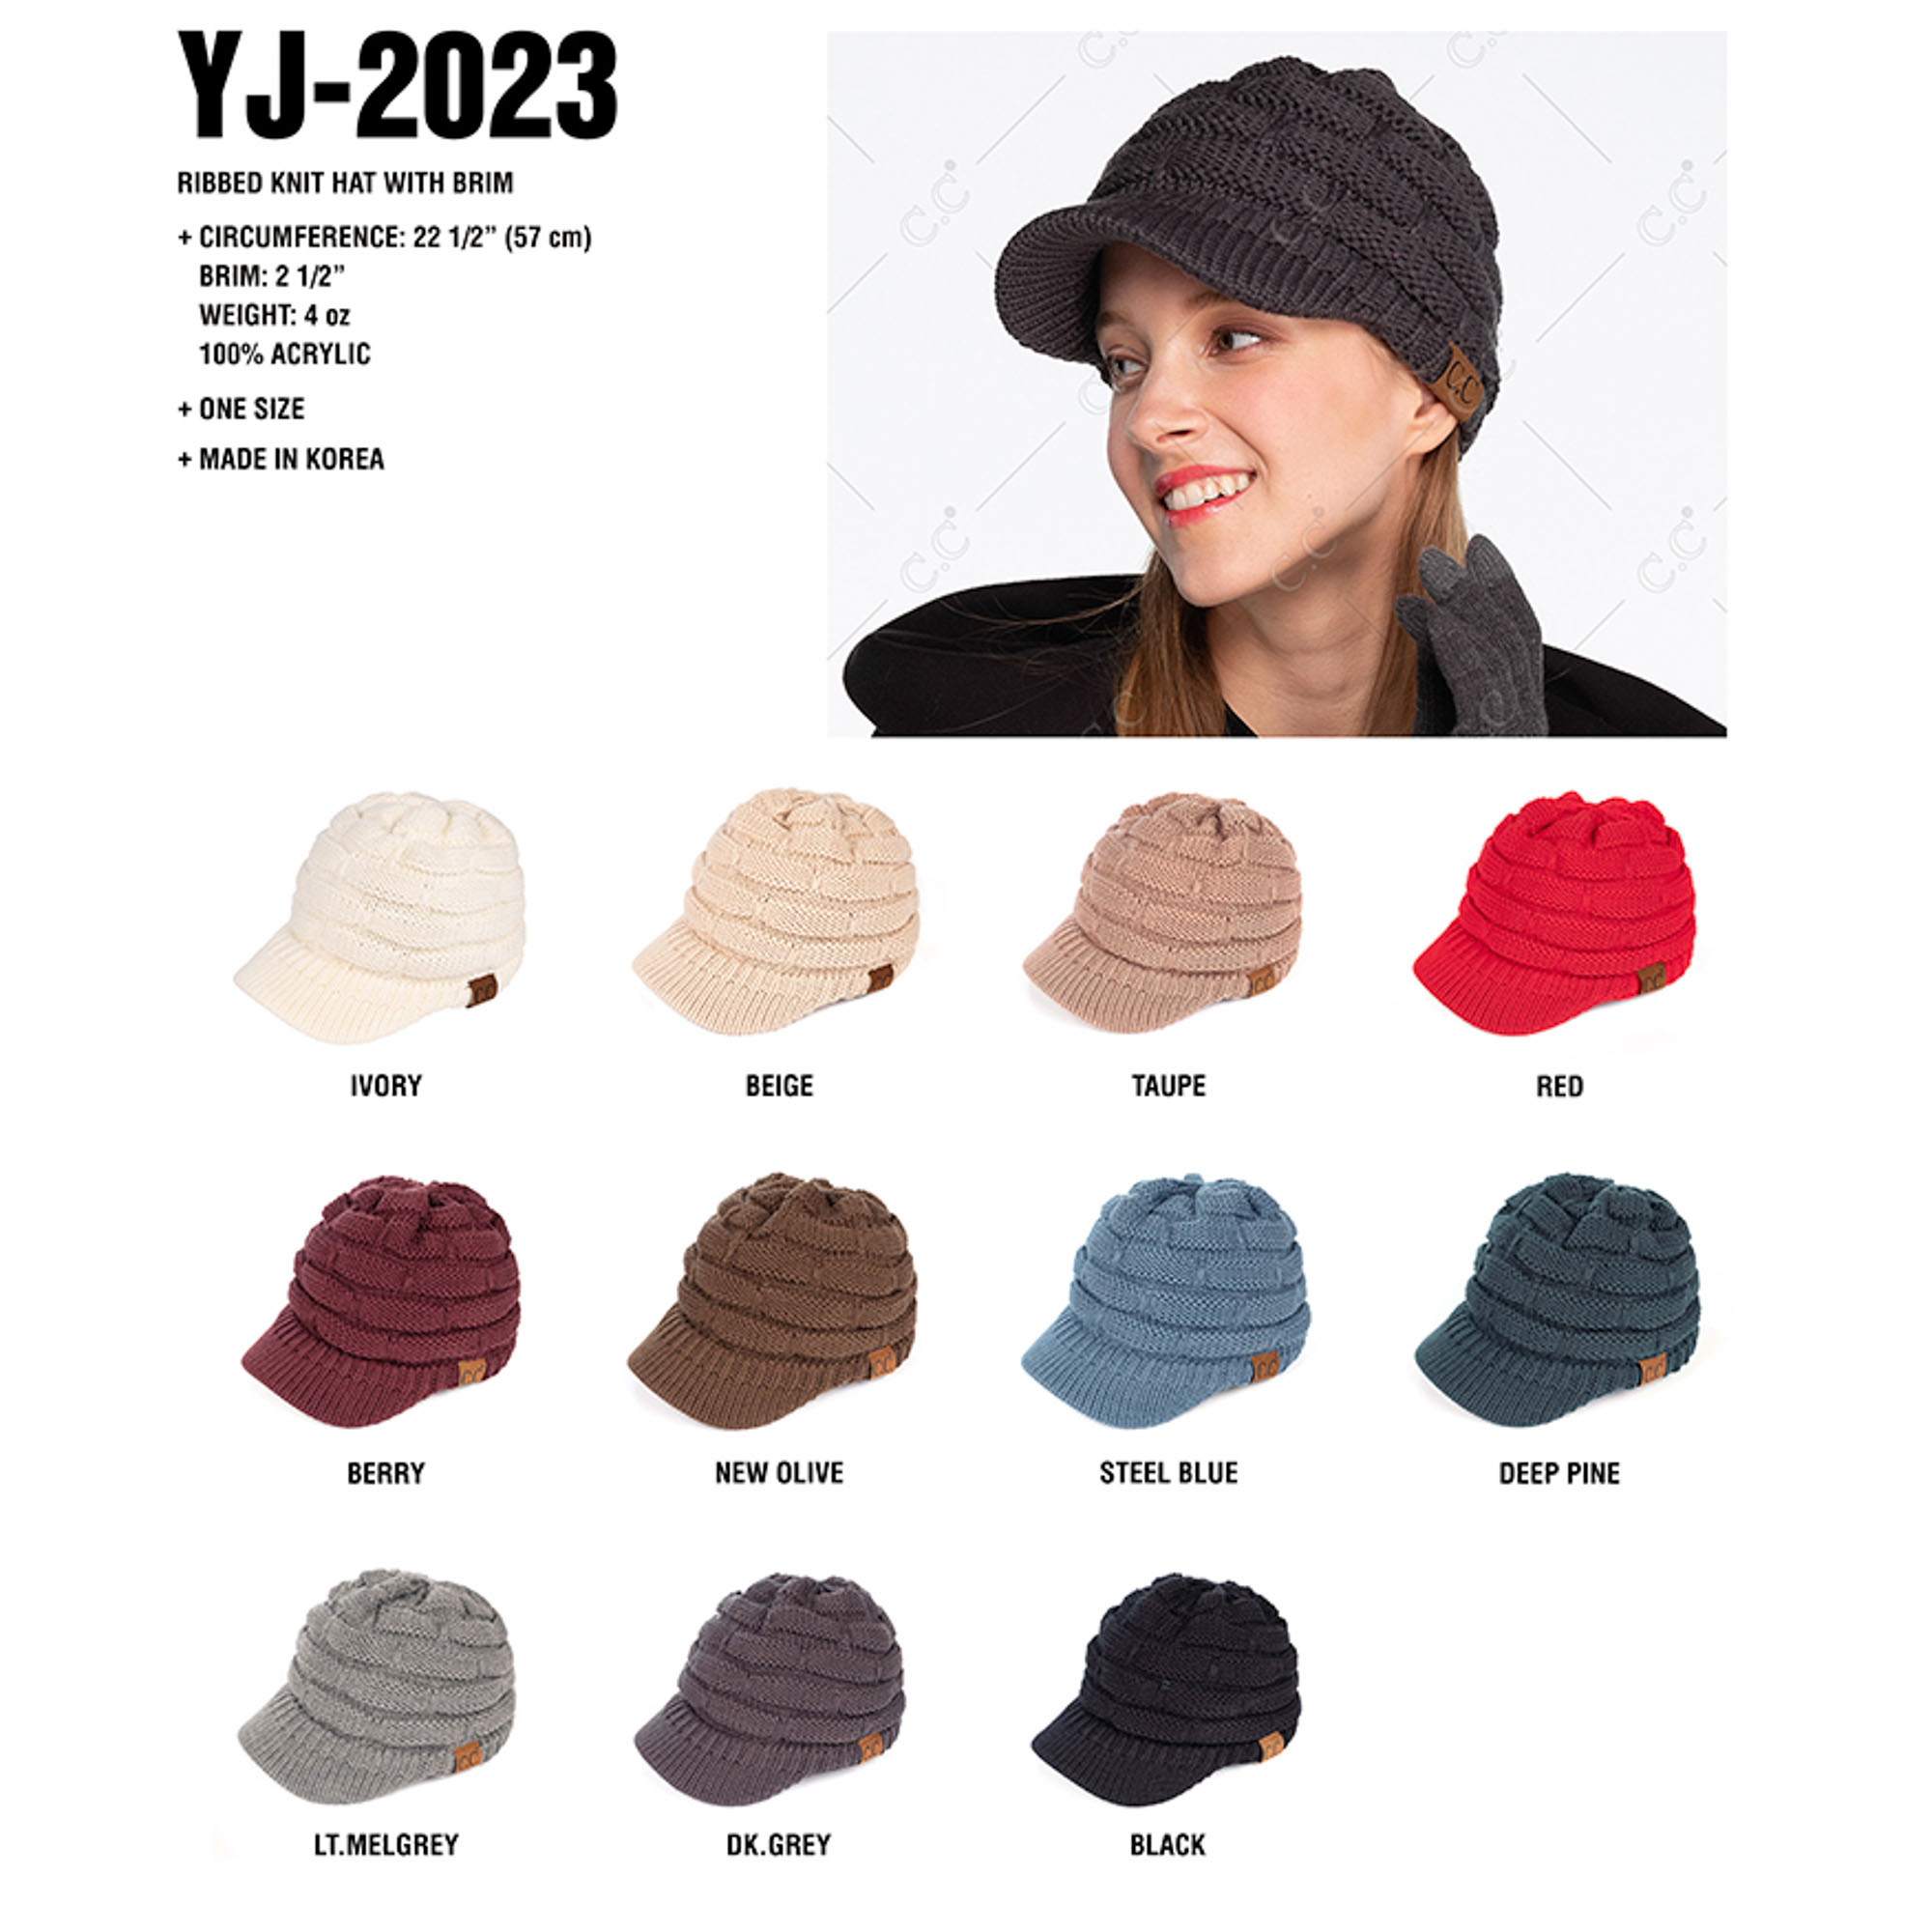 CC RIBBED KNIT HAT WITH BRIM